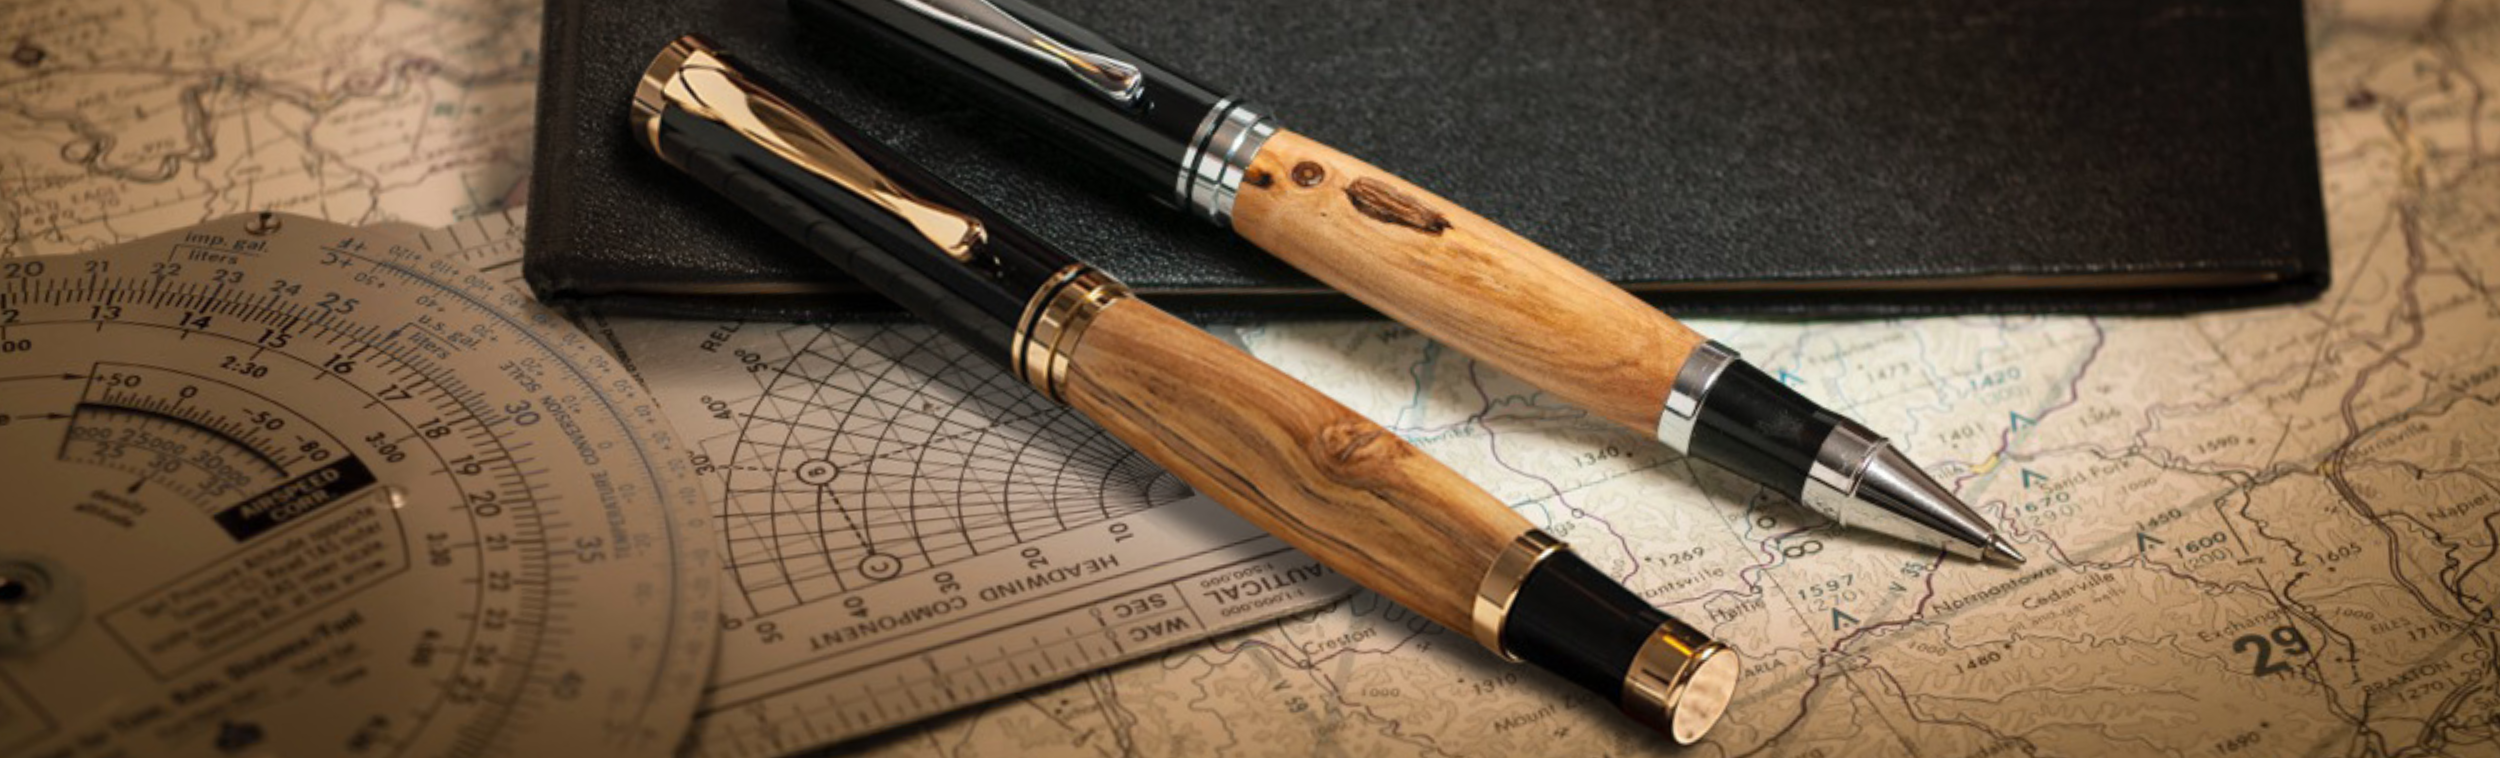 The Wright Brothers Pens and Notepads